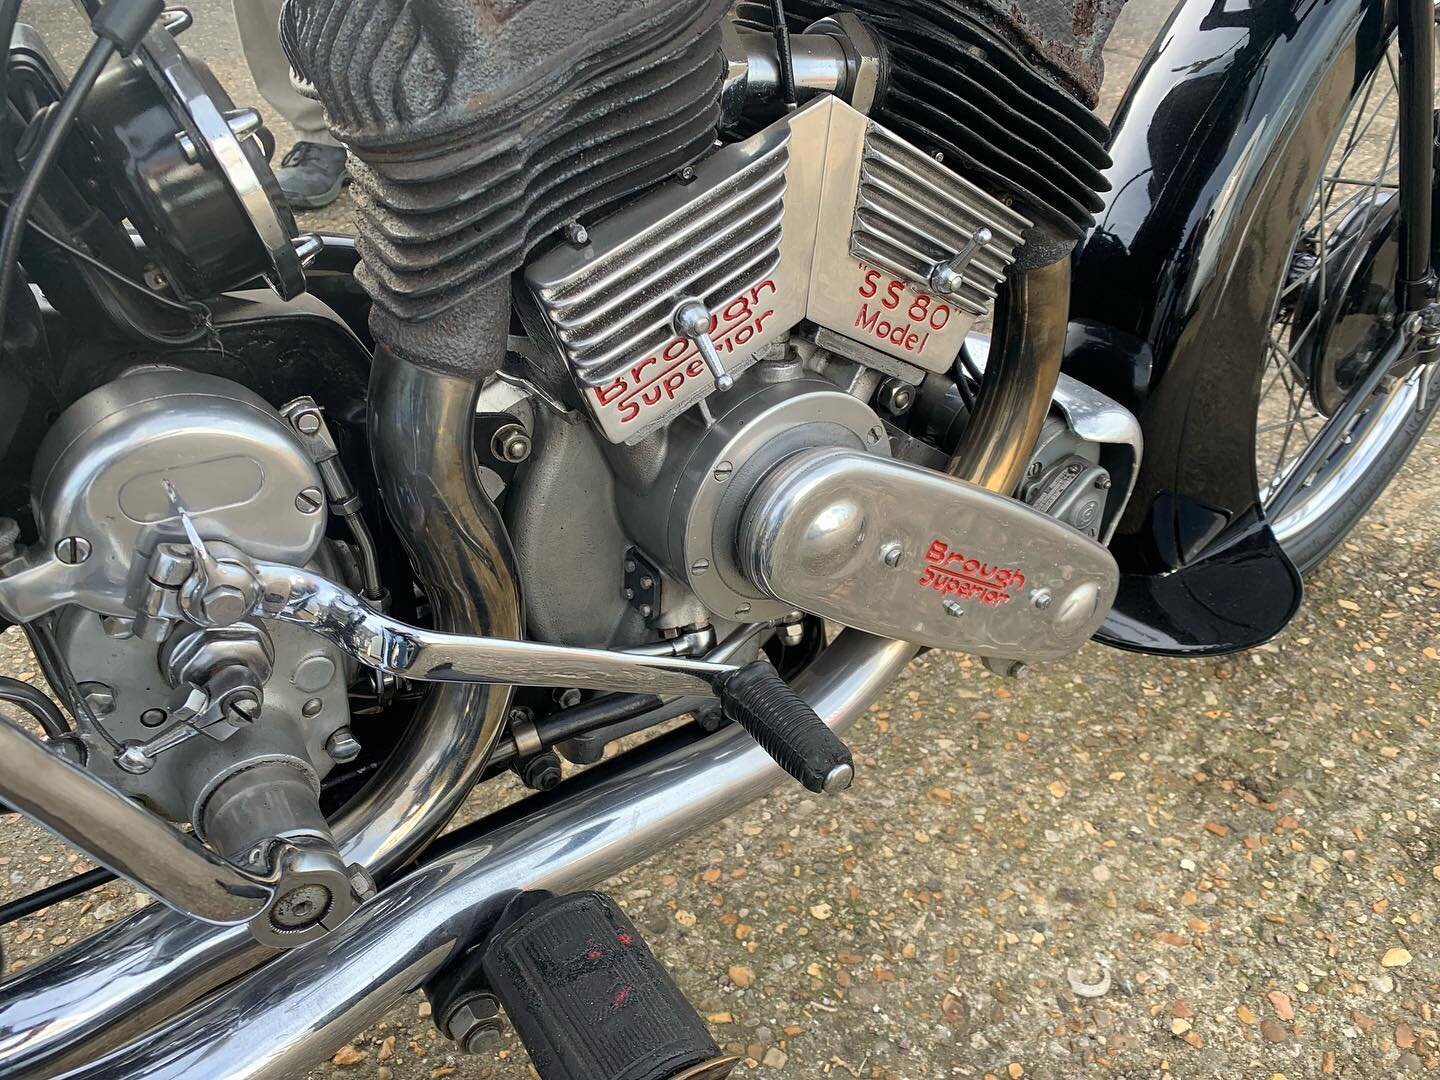 One Day maybe? 🤞
#vmcc #oldmotorcycle #broughsuperior #northcotswolds #girderforks